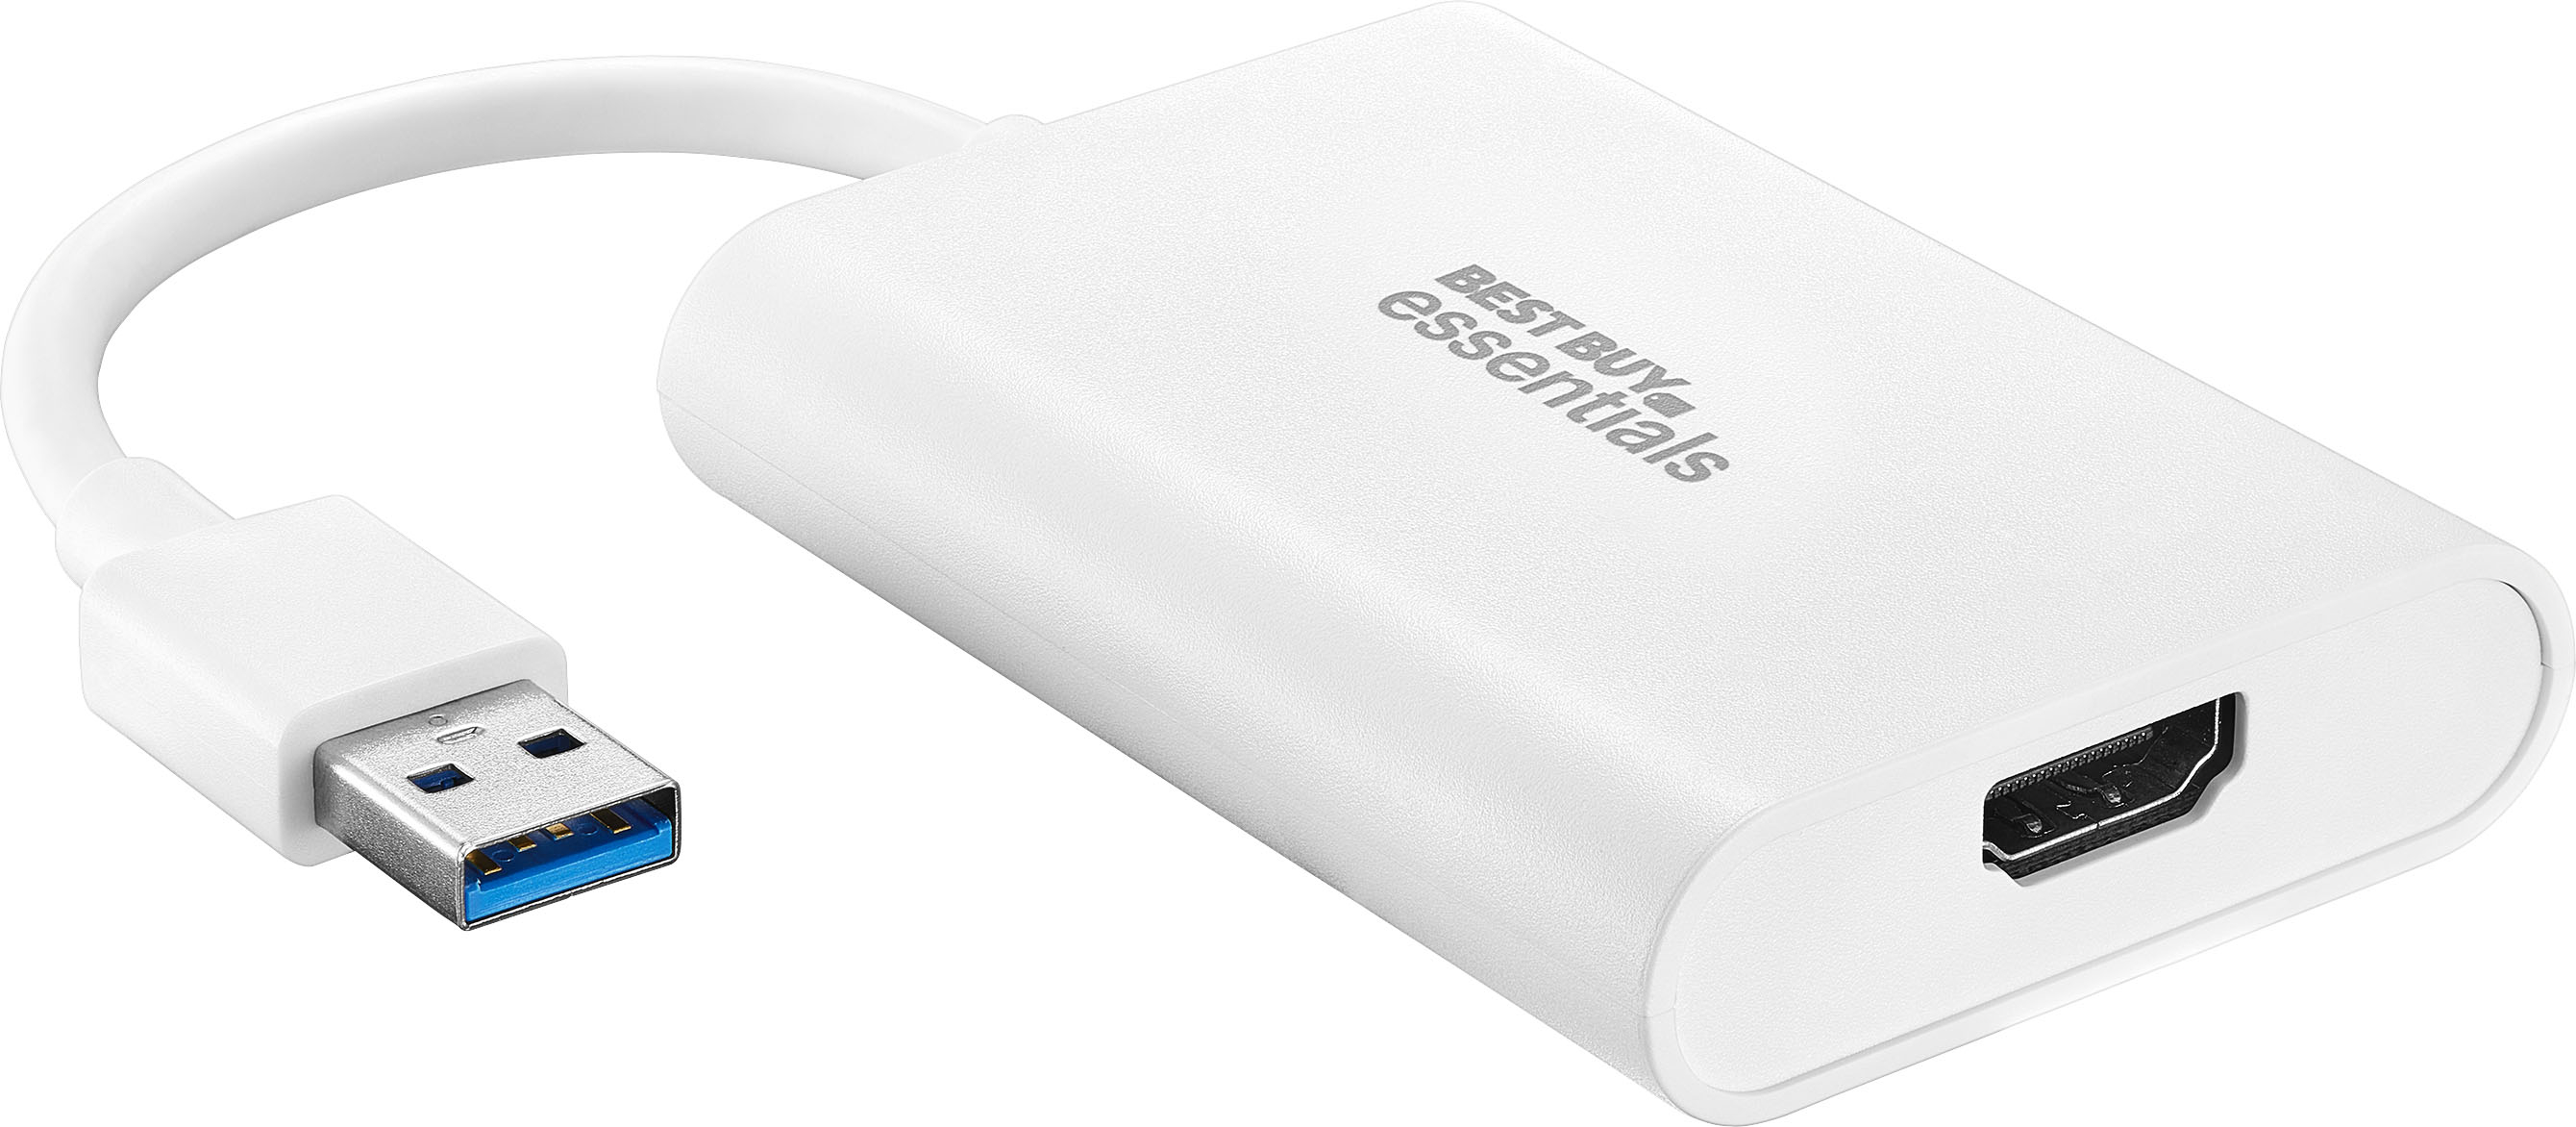 Best Buy: Best Buy essentials™ USB to HDMI Adapter White BE-PA3UHD